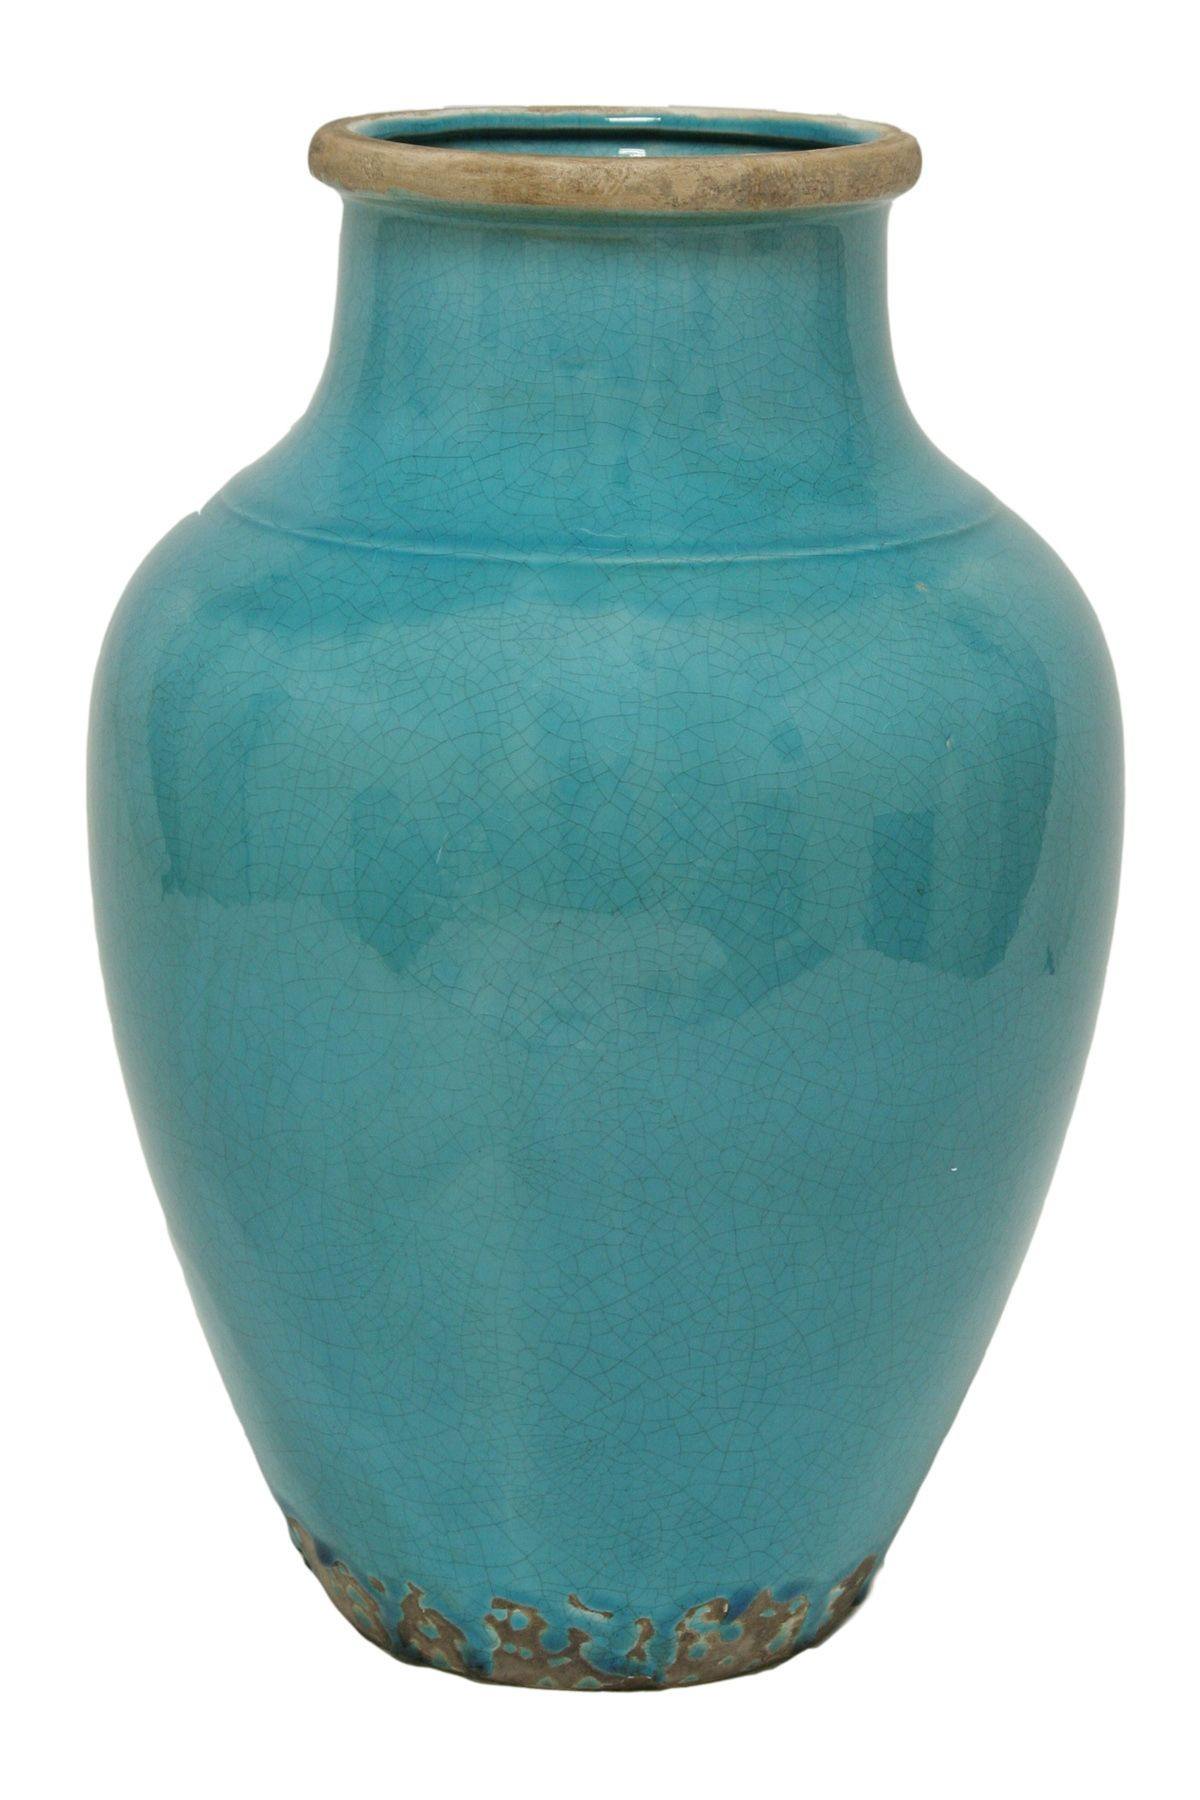 24 Unique Baby Blue Vase 2024 free download baby blue vase of blue decorative vases image perfect color and accent piece love it inside blue decorative vases image perfect color and accent piece love it my seaside home